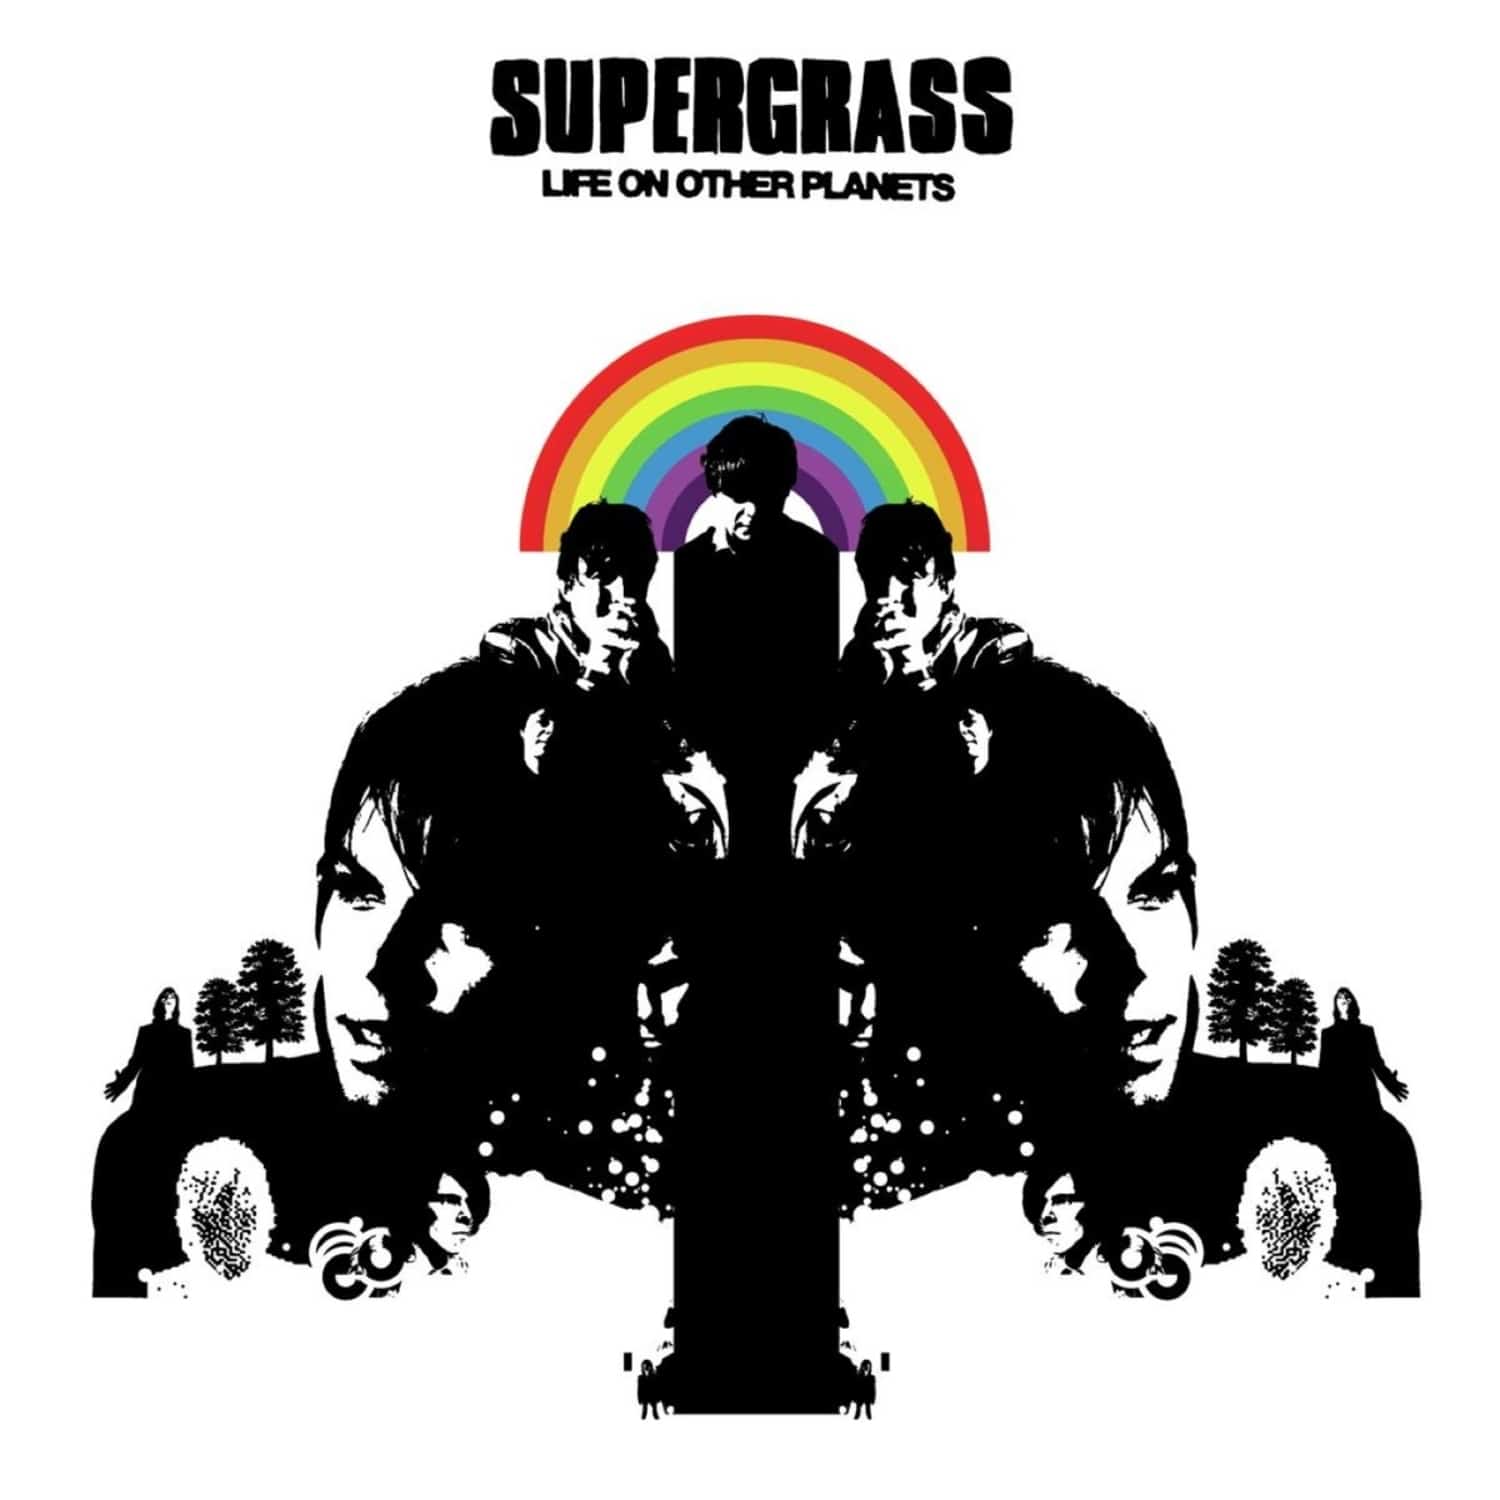 Supergrass - LIFE ON OTHER PLANETS 